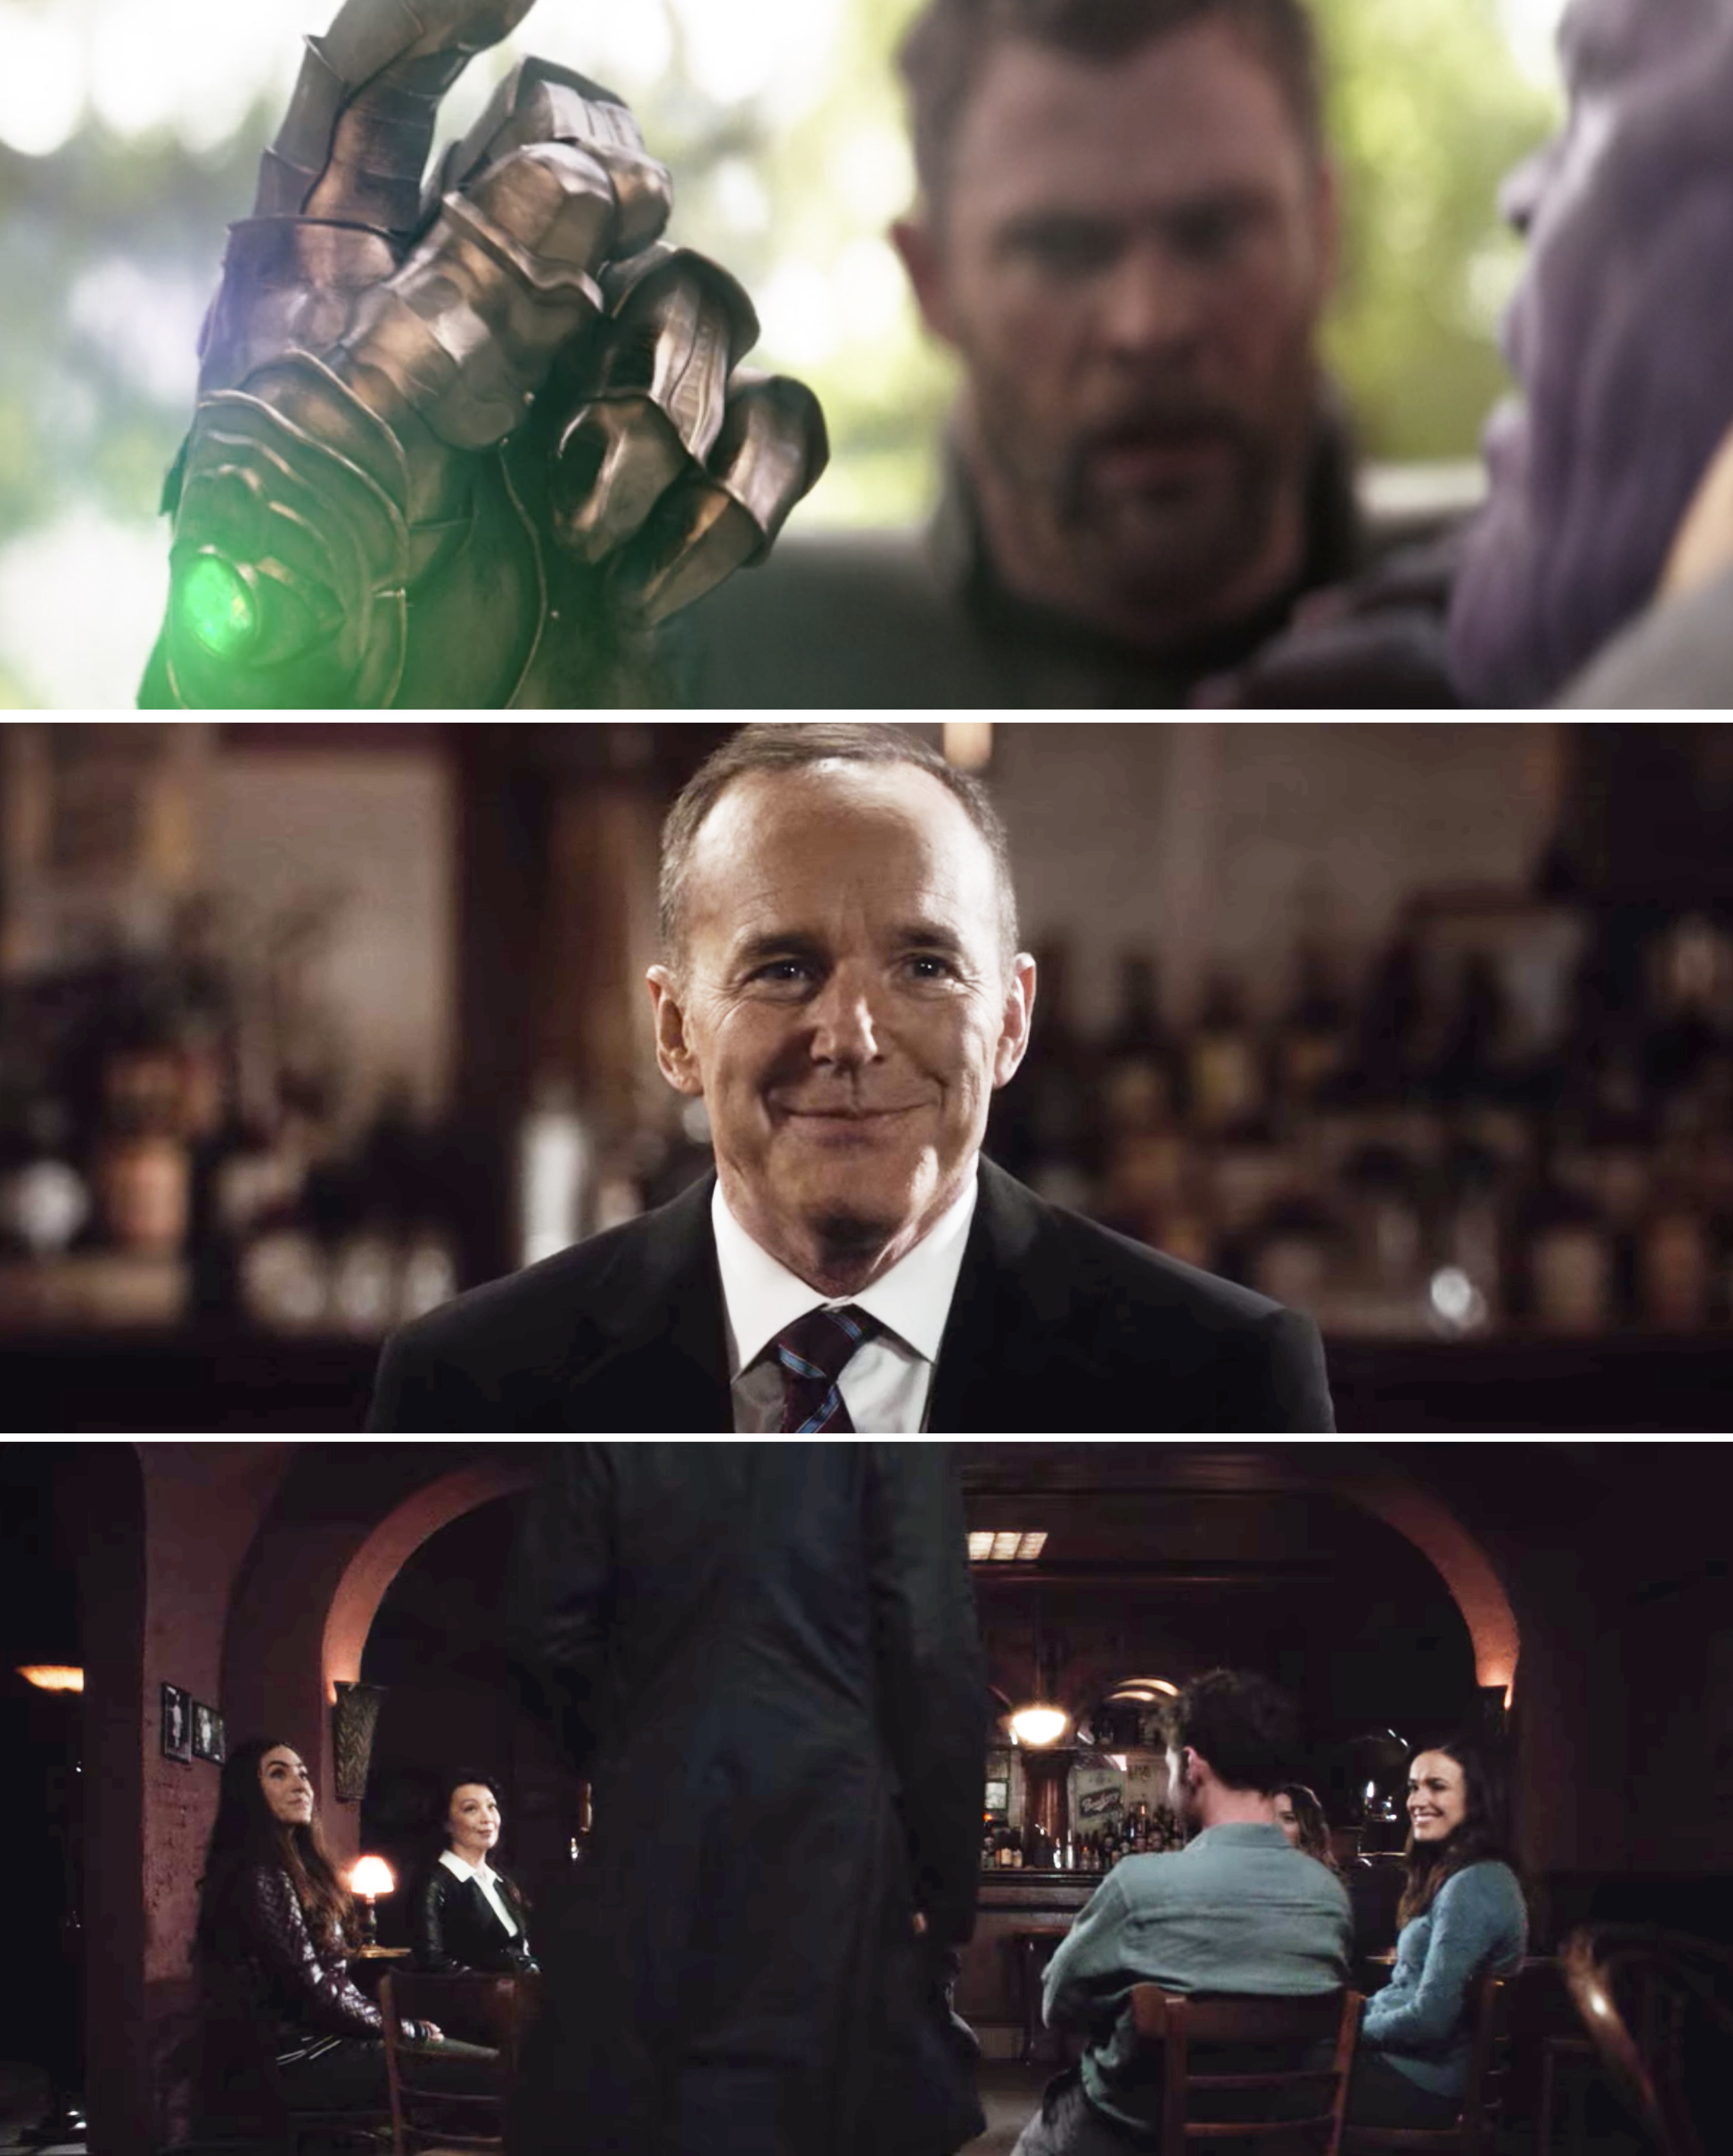 Thanos snapping his fingers vs. Coulson and his team talking